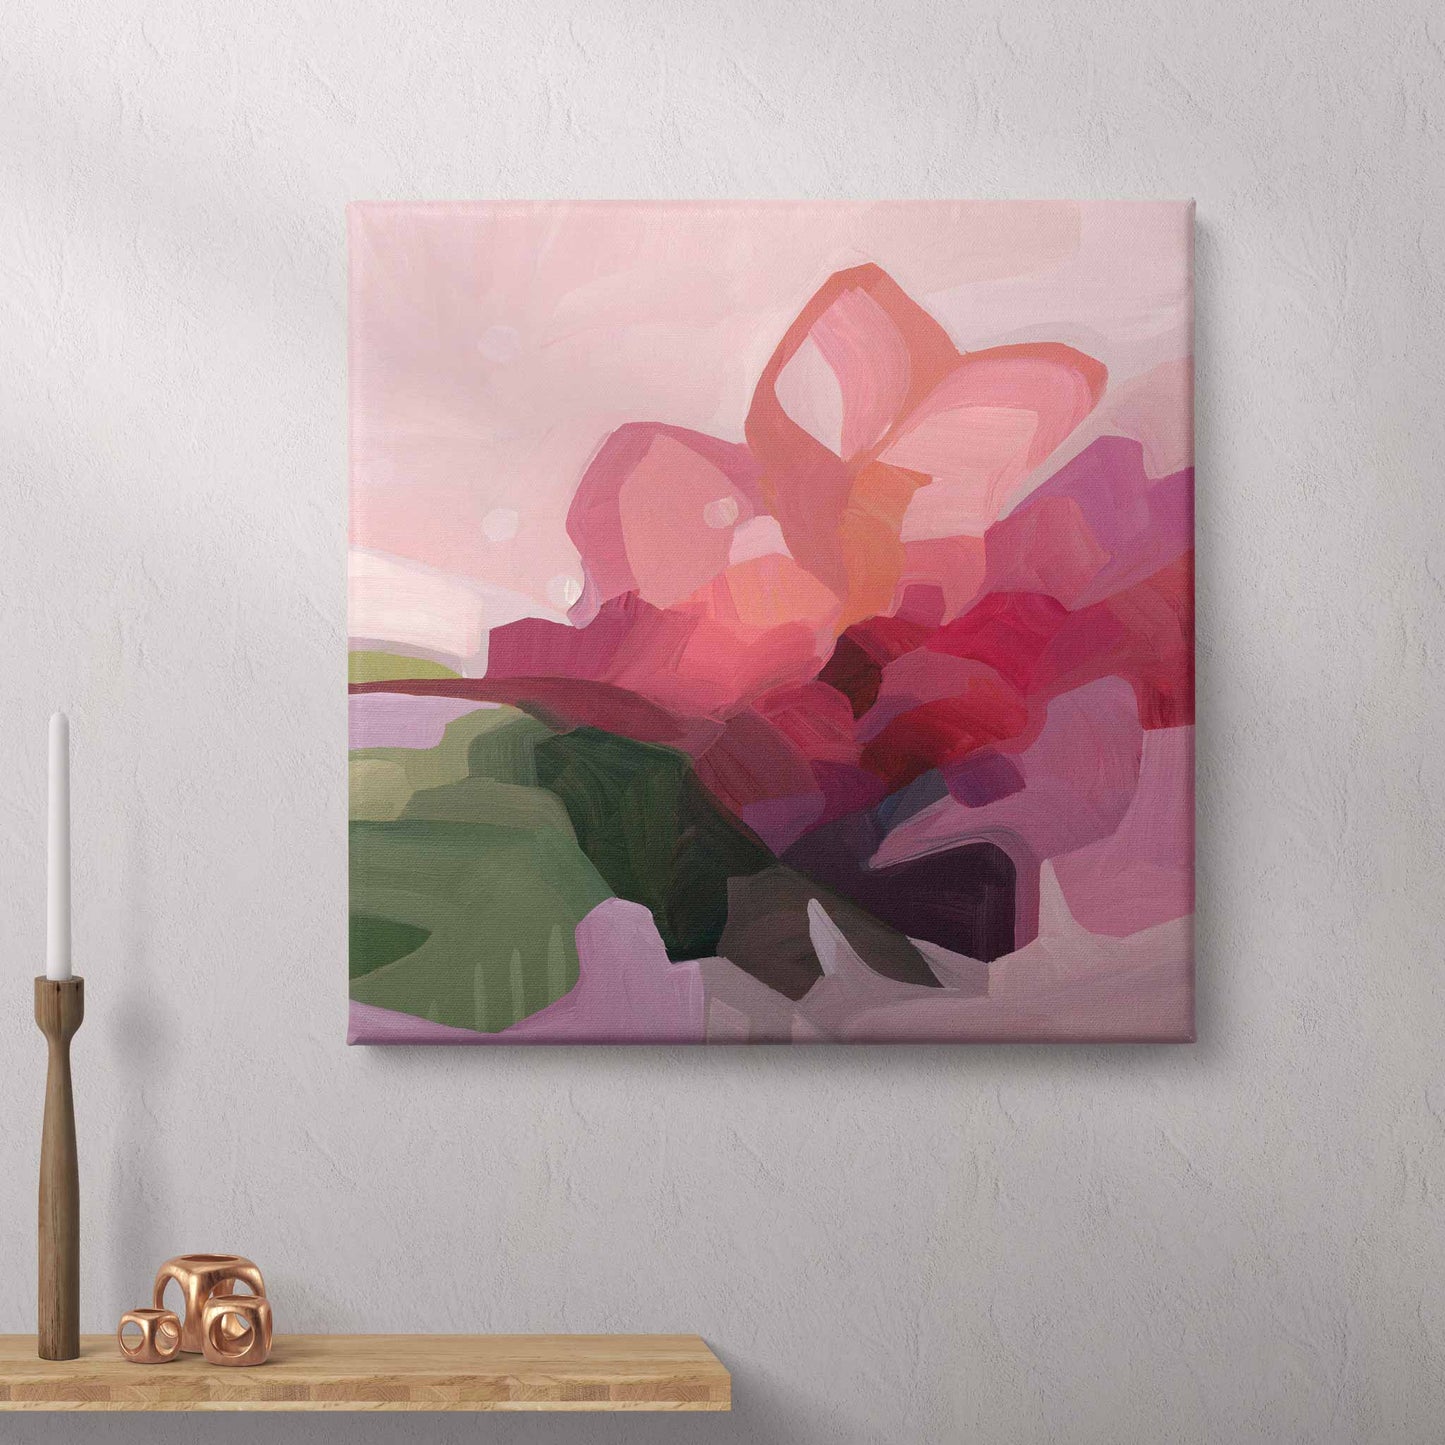 canvas art print of a pink magenta abstract flower painting by Canadian artist Susannah Bleasby